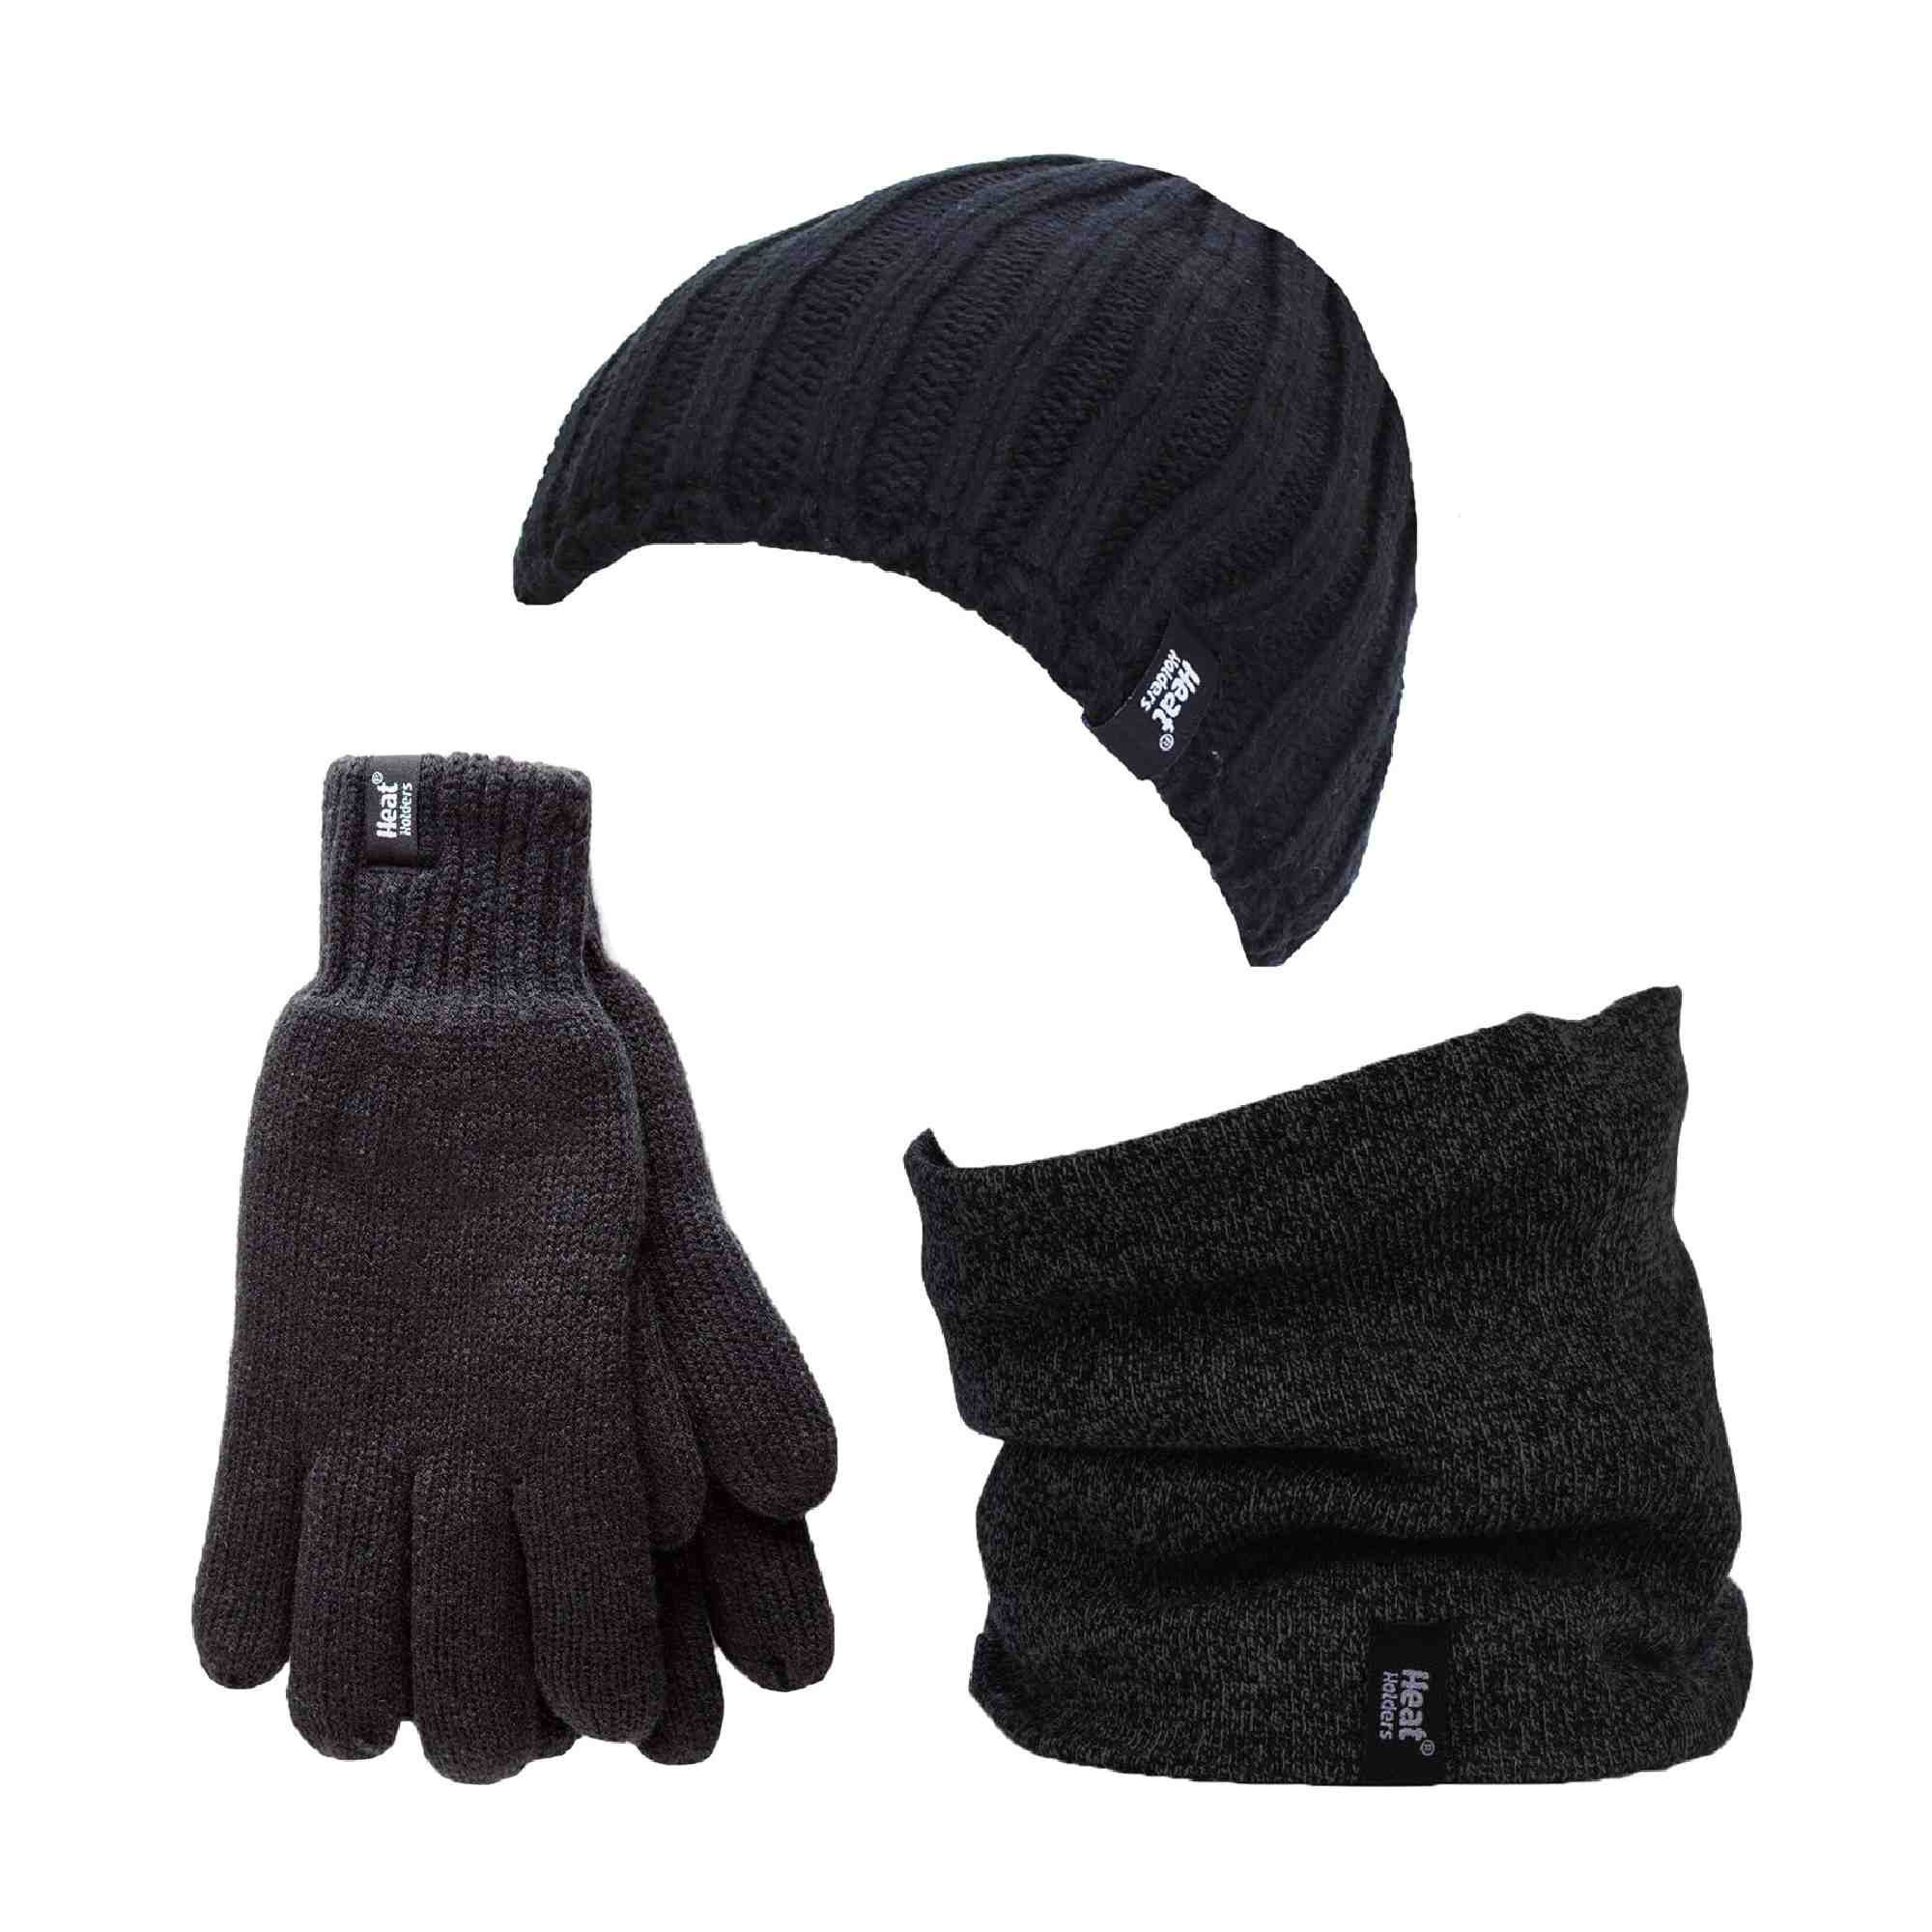 Heat Holders Men's Thermal Gloves With Plush Thermal Lining –